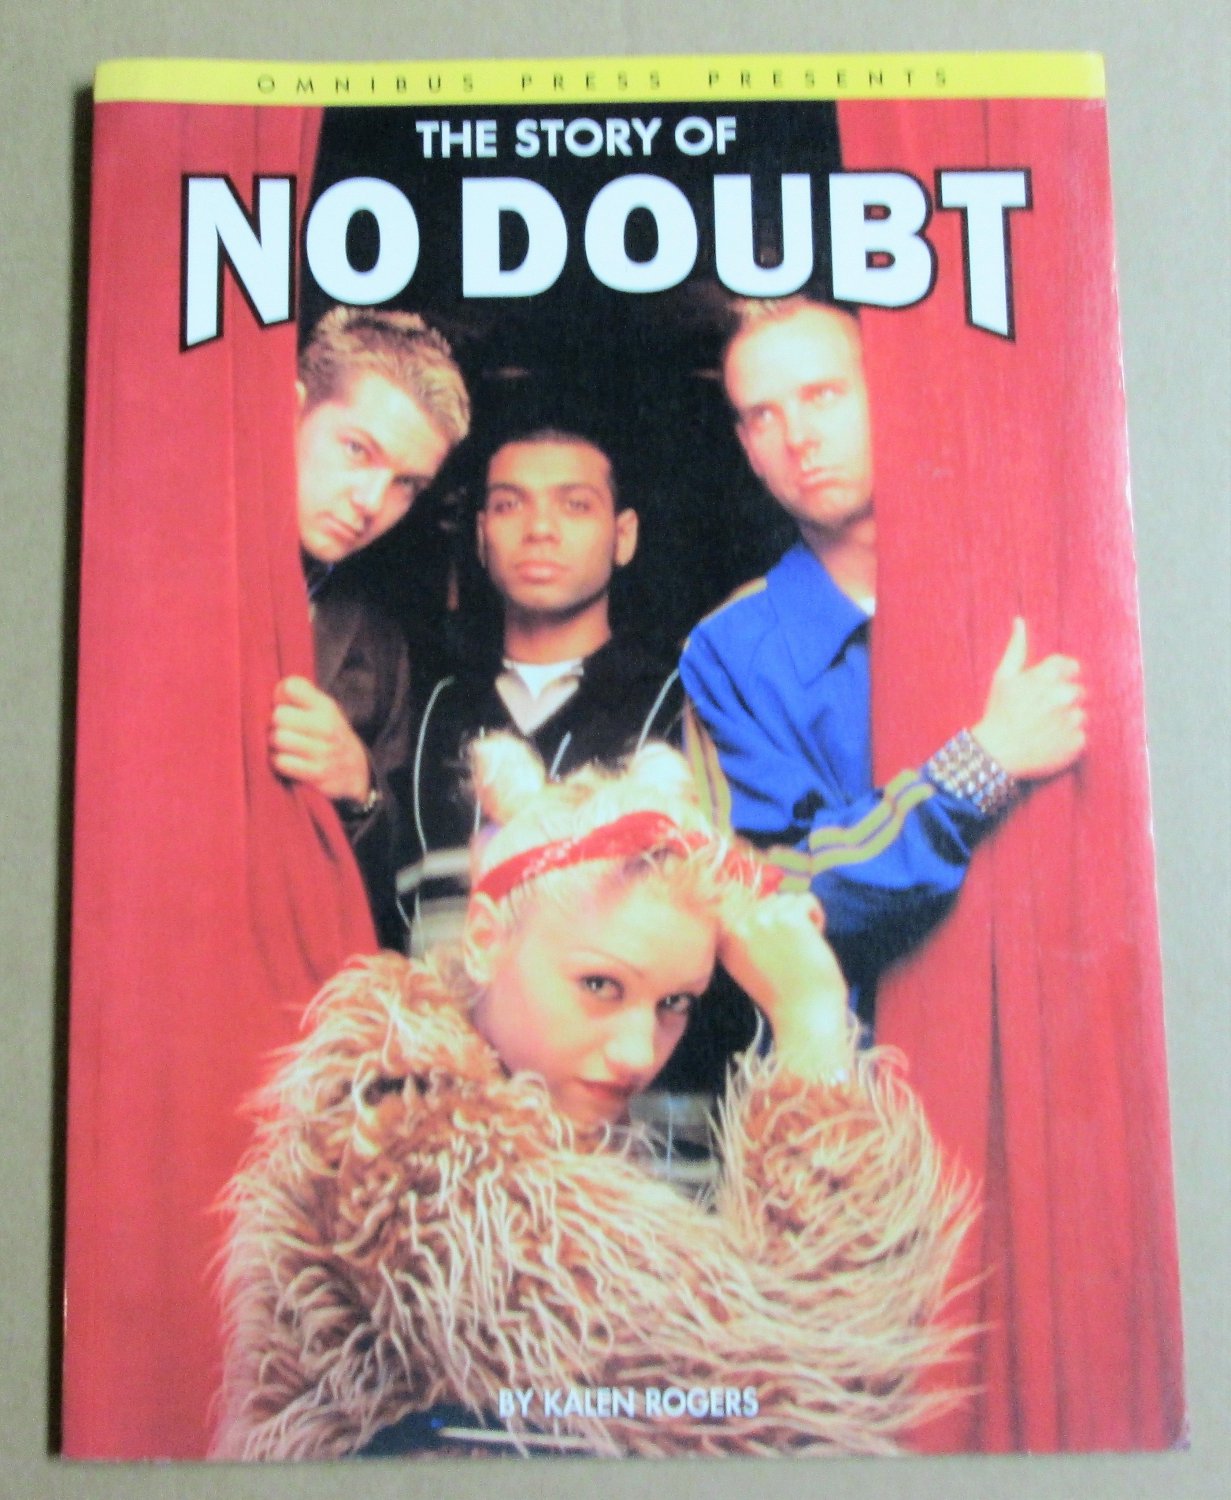 Omnibus Press Presents THE STORY OF NO DOUBT Softcover Book by Kalen Rogers